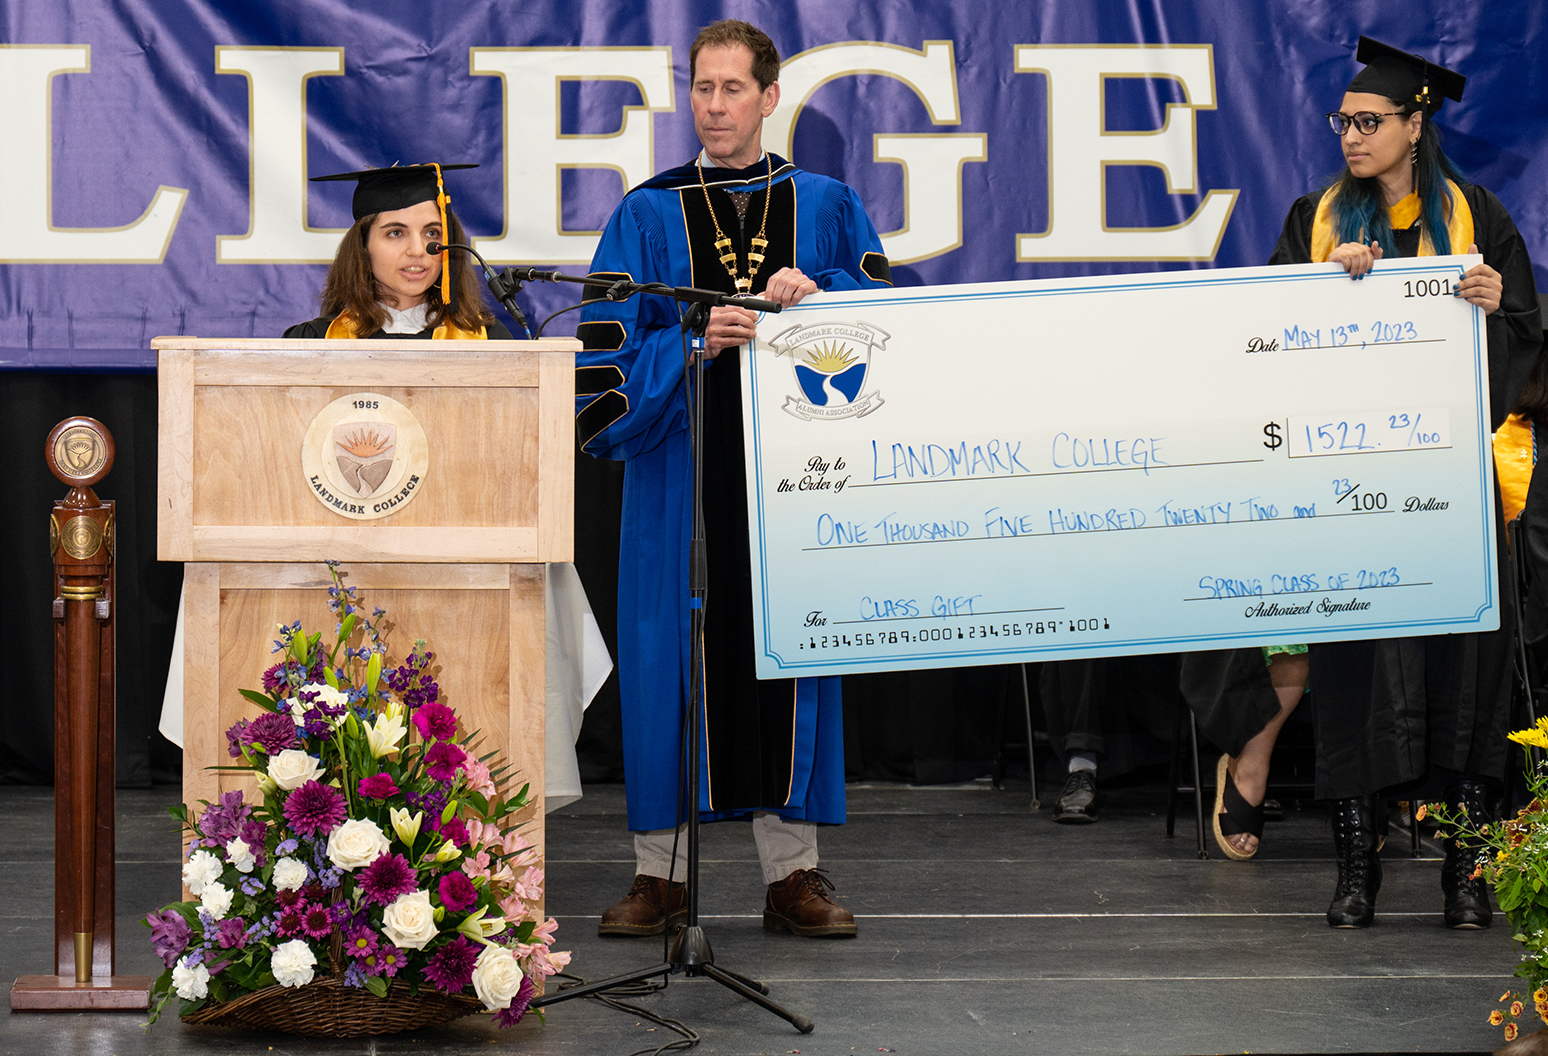 A female student stands at podium making remarks while a male and female hold an oversized check made out to Landmark College in the amount of $1,522.23 